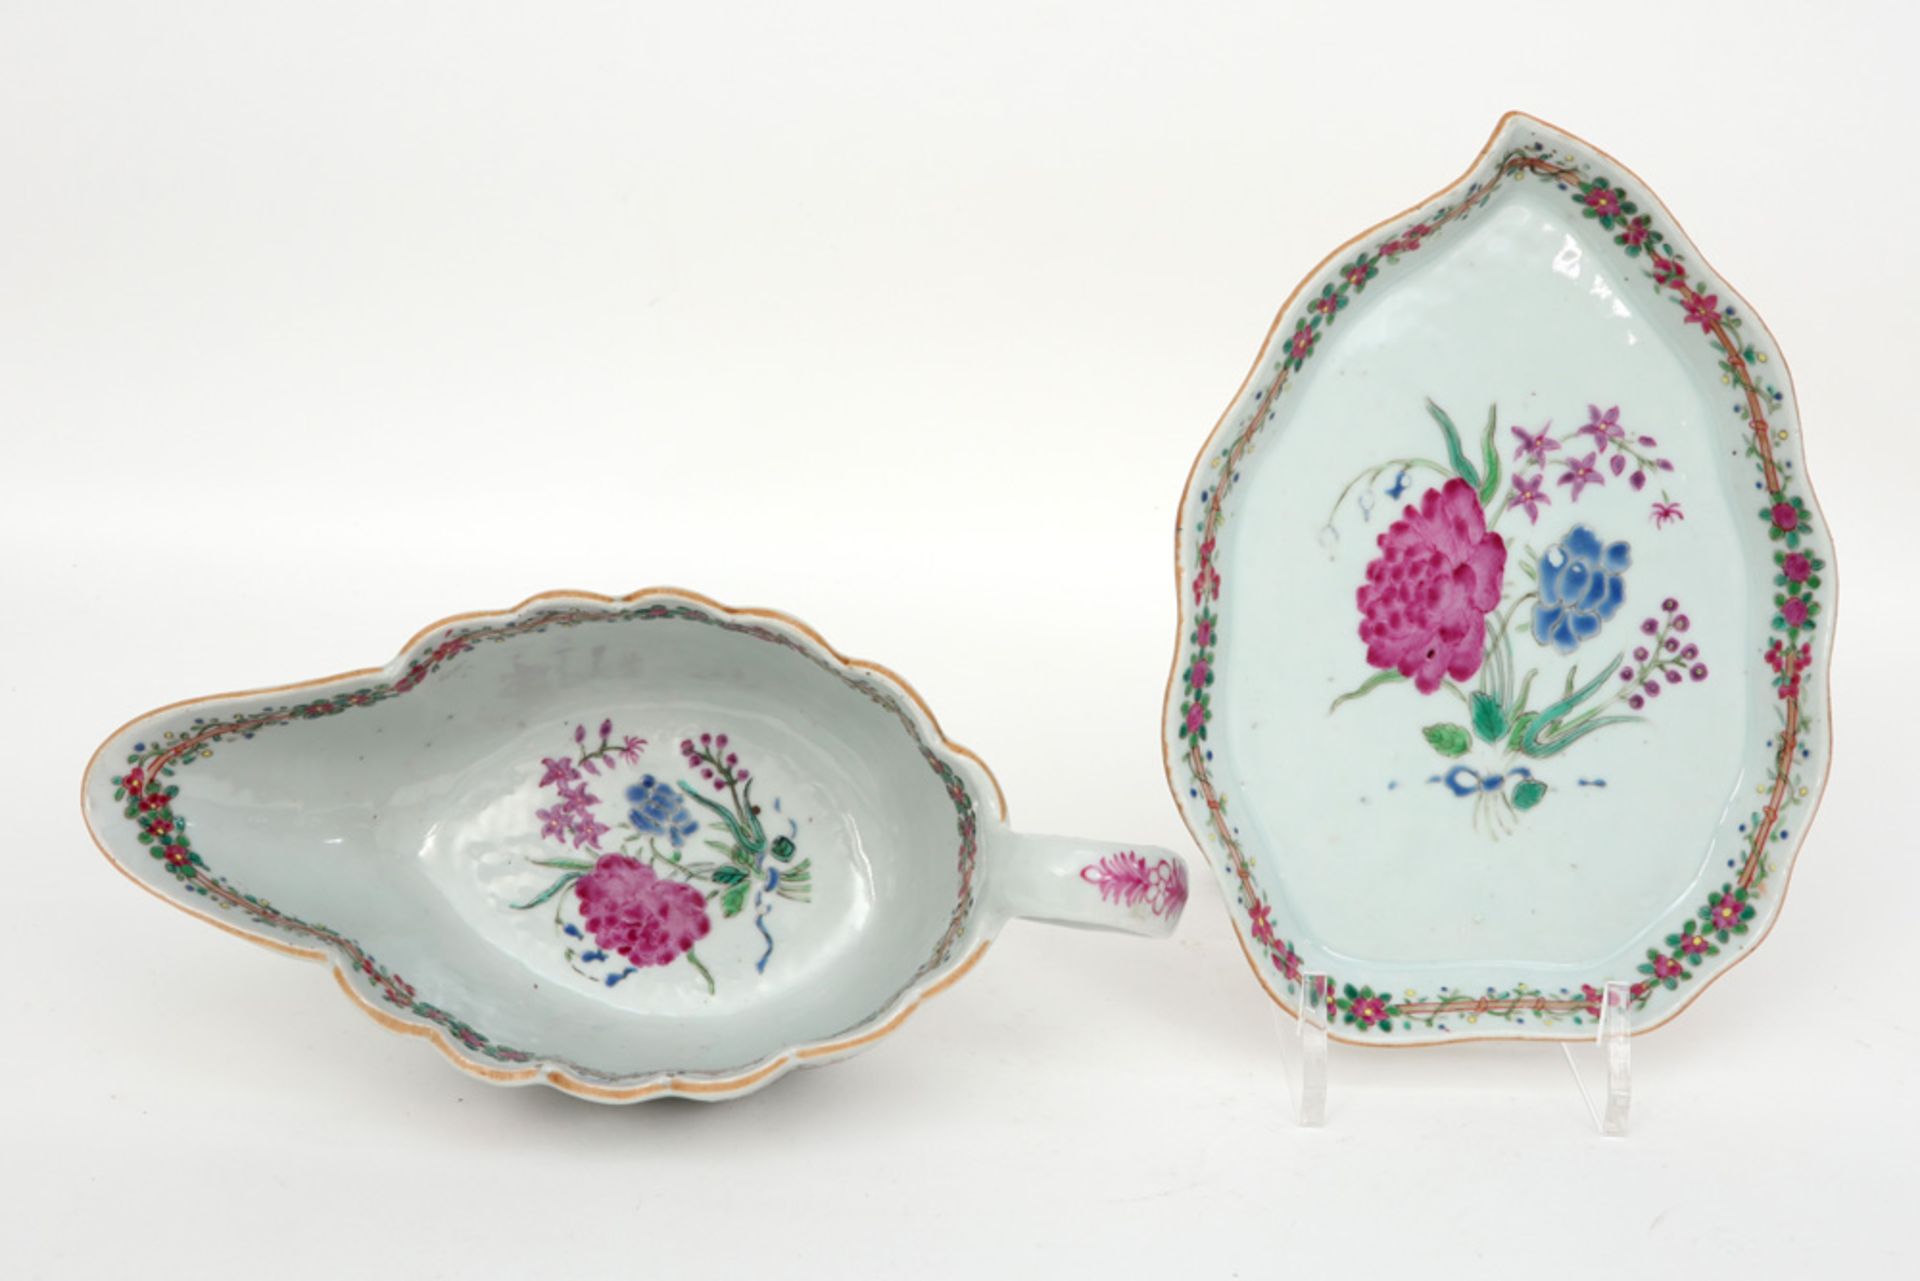 18th Cent. Chinese set of sauce boat and its tray in porcelain with a floral 'Famille Rose' decor || - Image 2 of 4